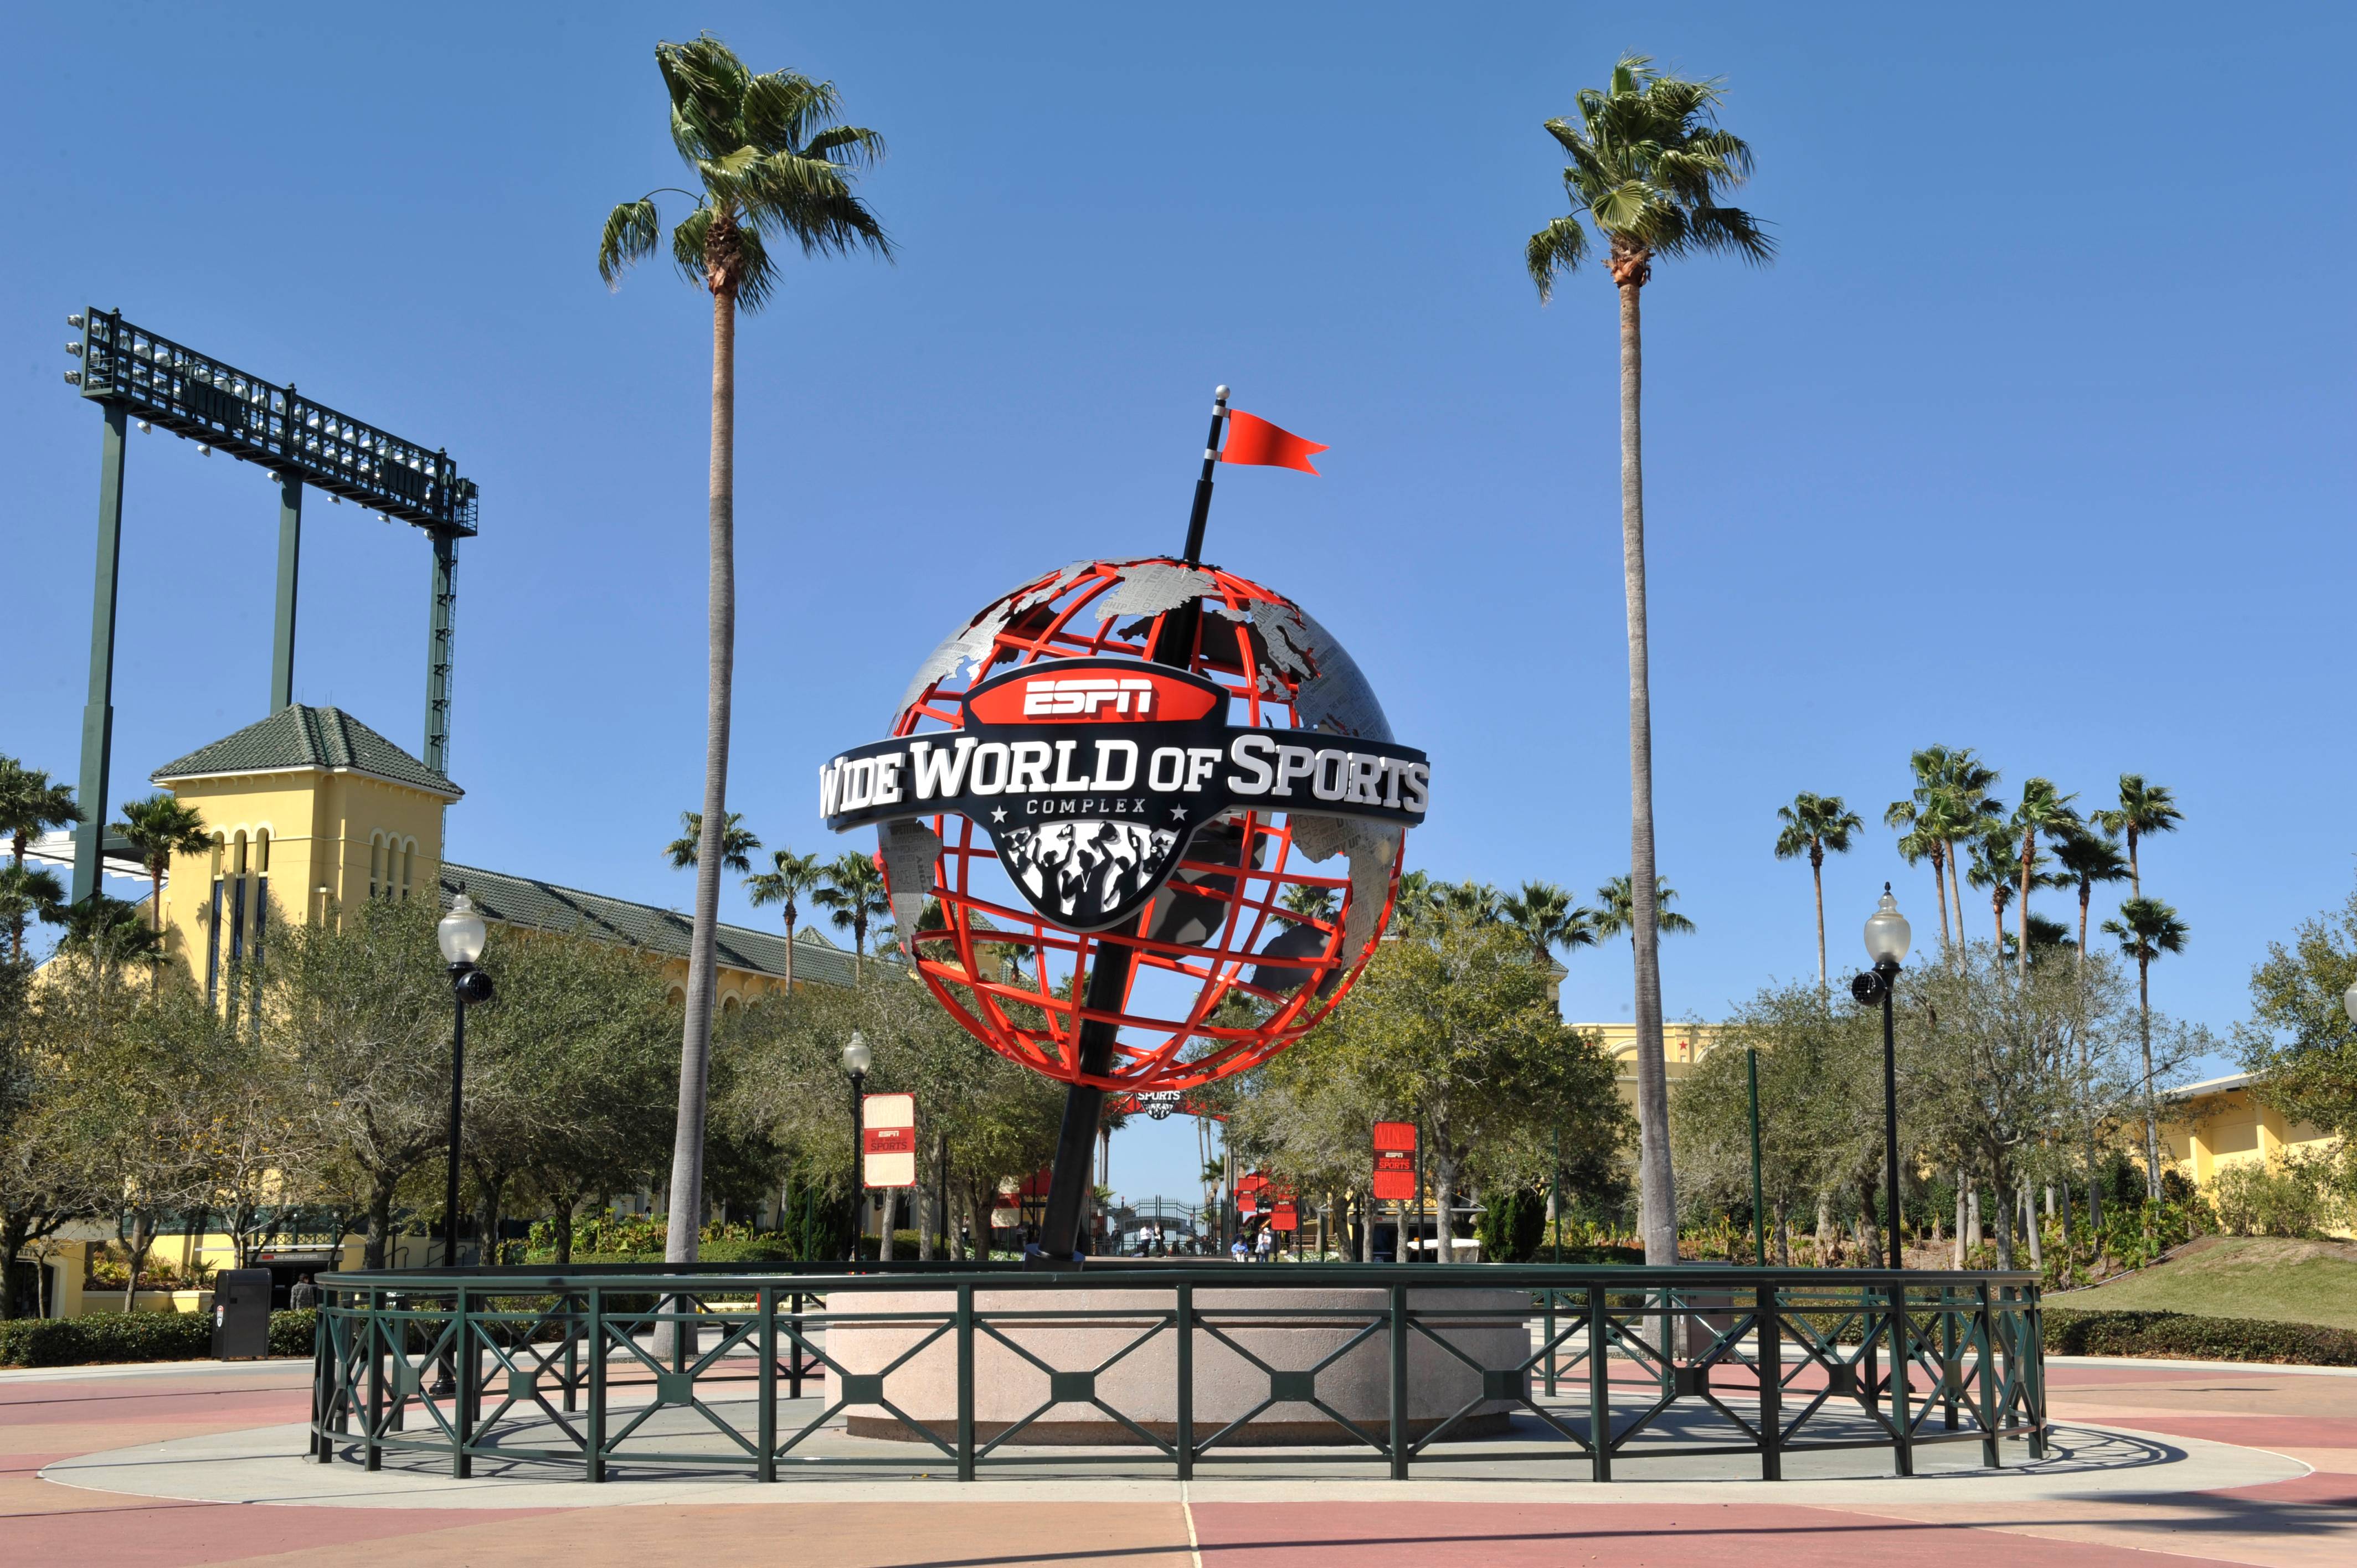 Wide World of Sports celebrates 10 years with expansion announcement